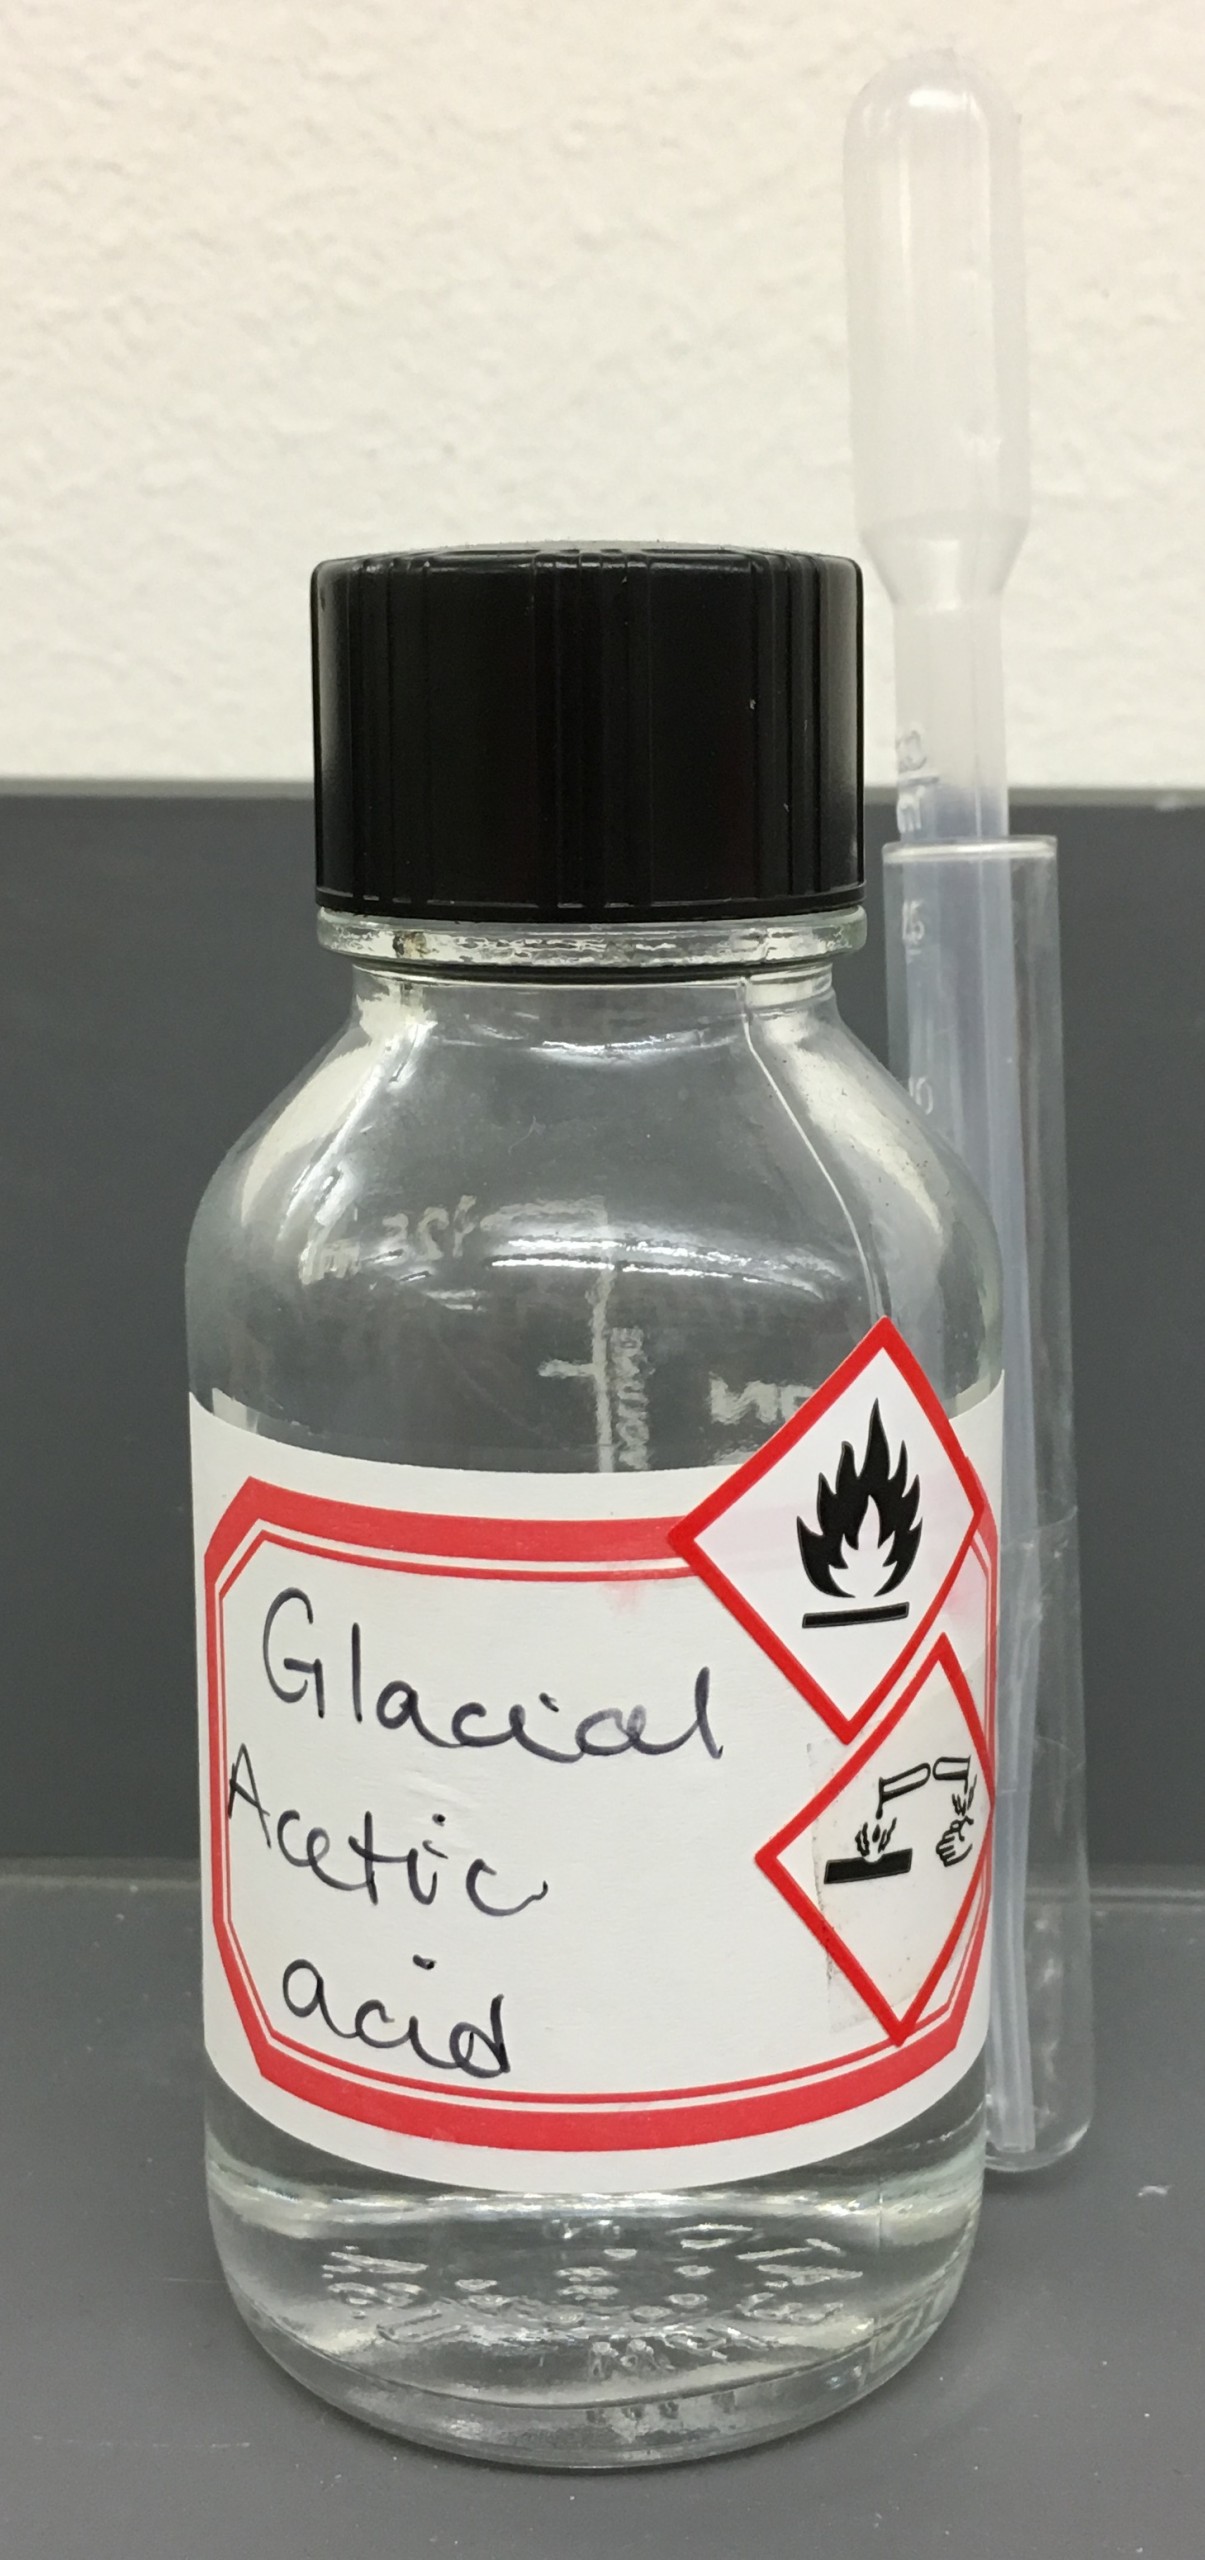 Chemical Container Labeling – Laboratory Safety